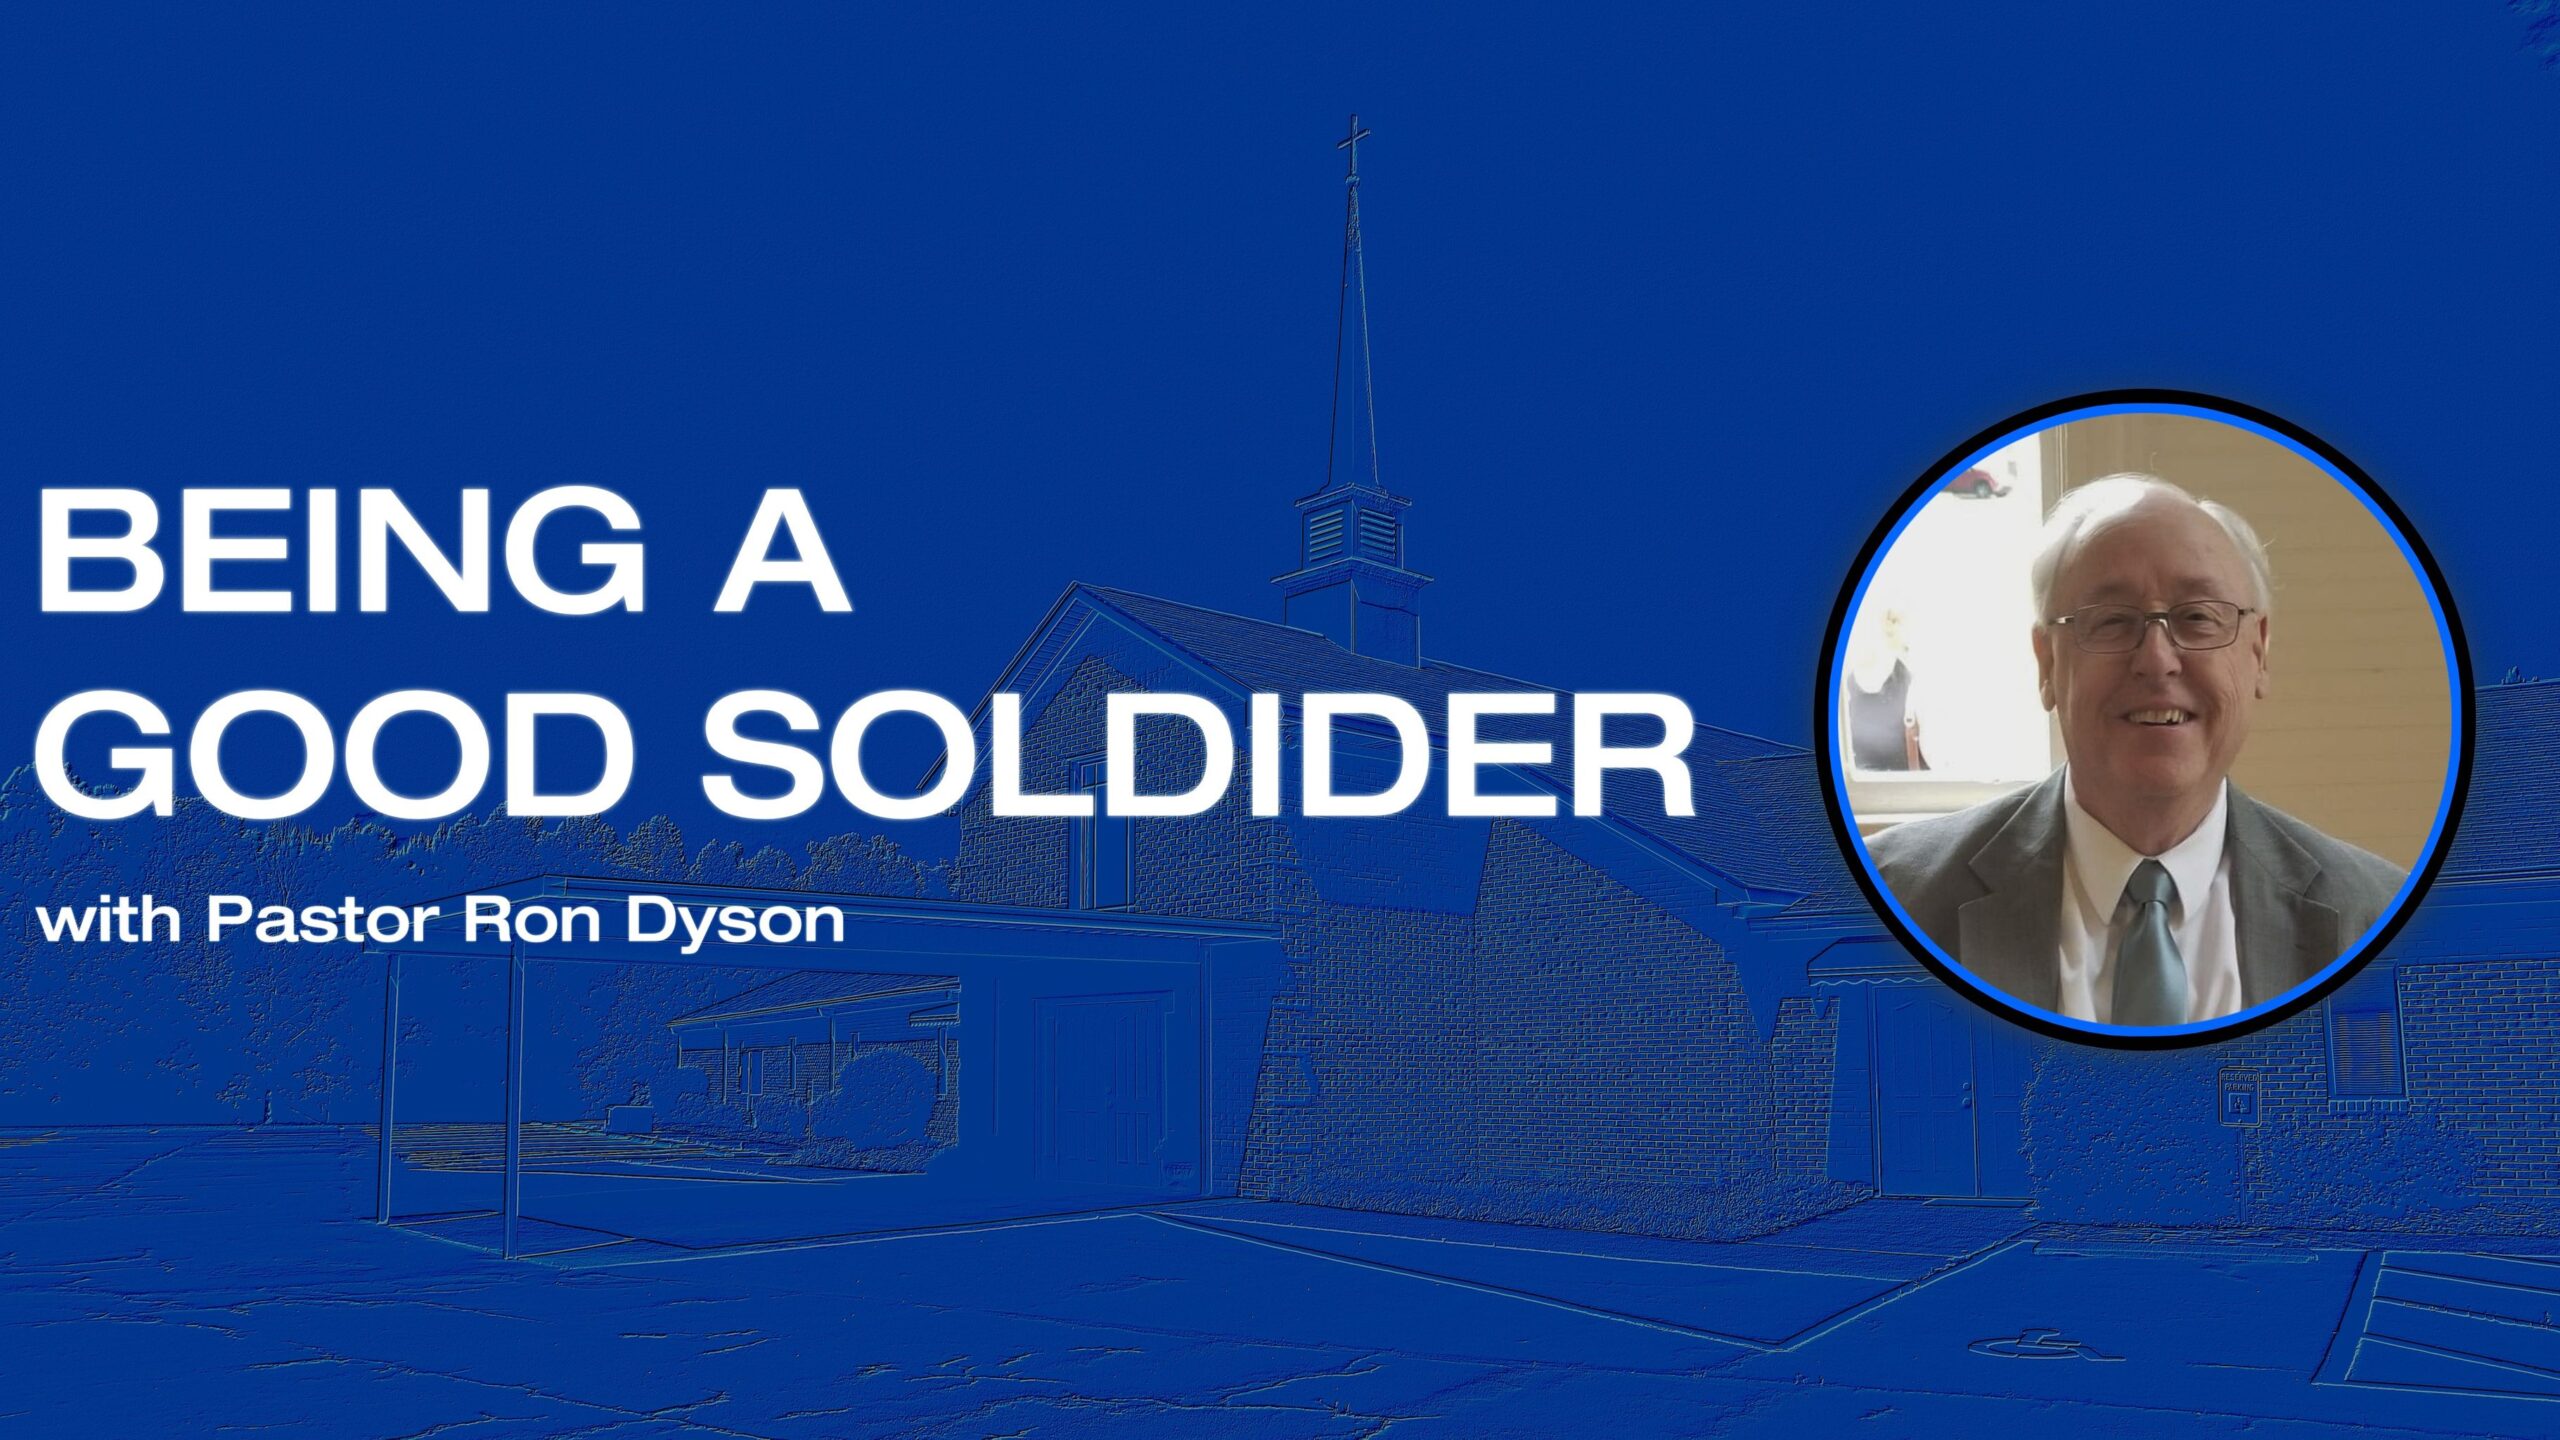 Being a Good Soldier, with Pastor Ron Dyson